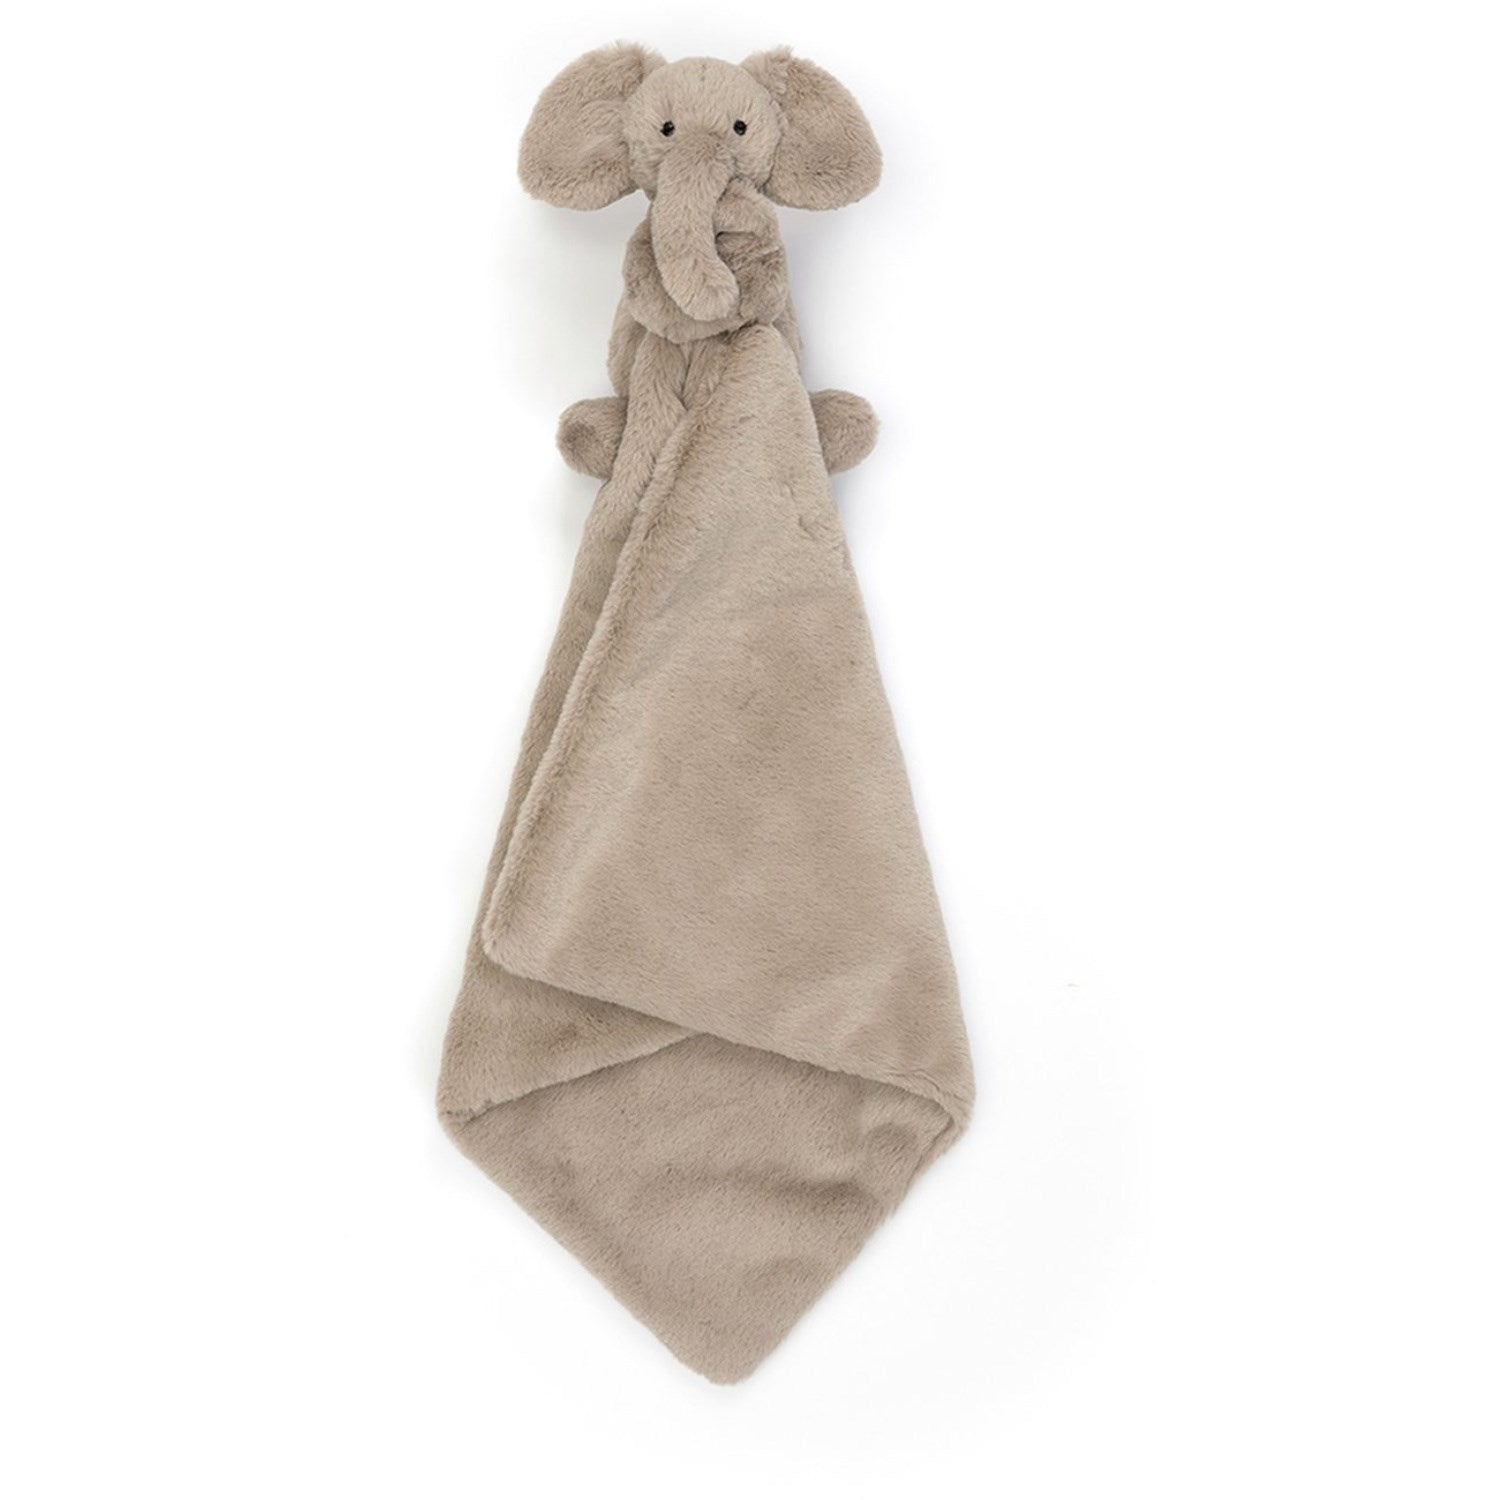 Jellycat Smudge Elephant Soother 2